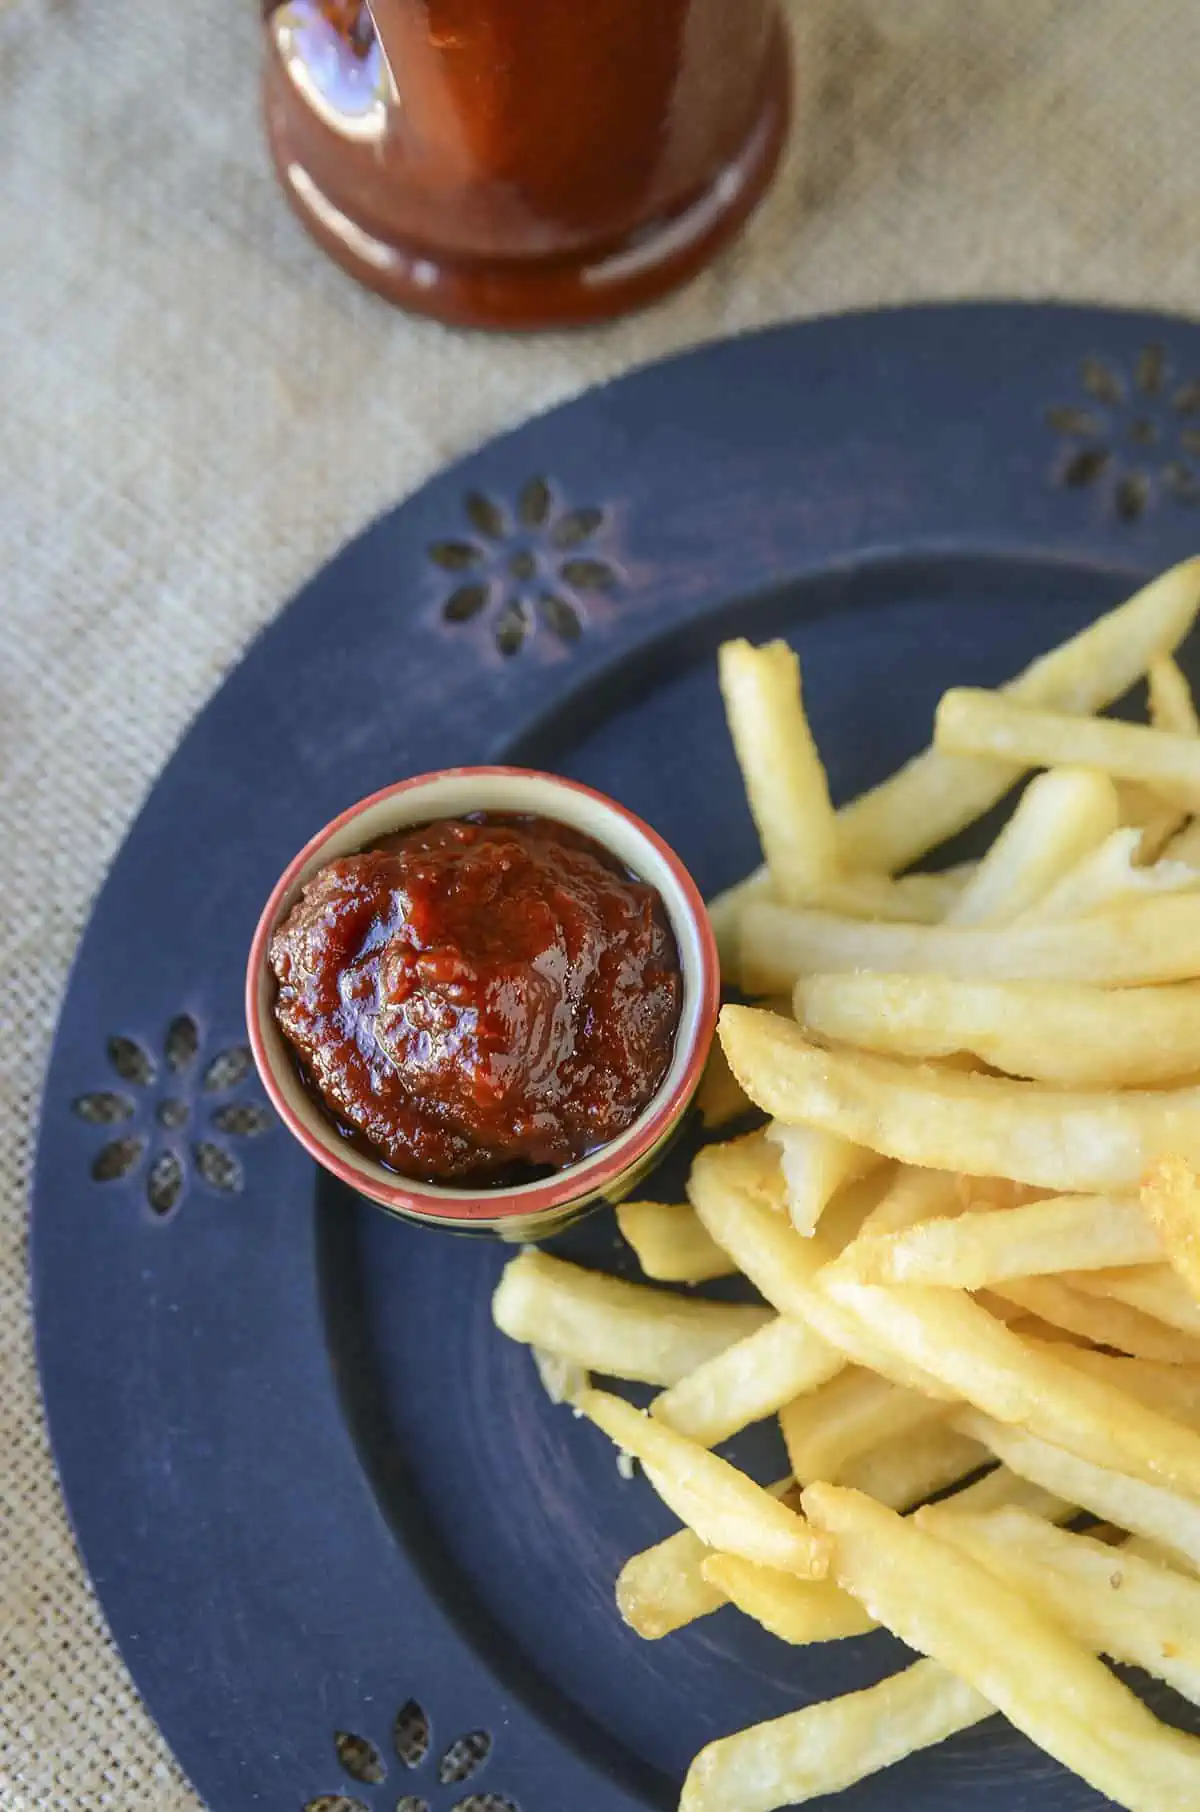 Ketchup in a small ramekin next to some french fries on a black plate.